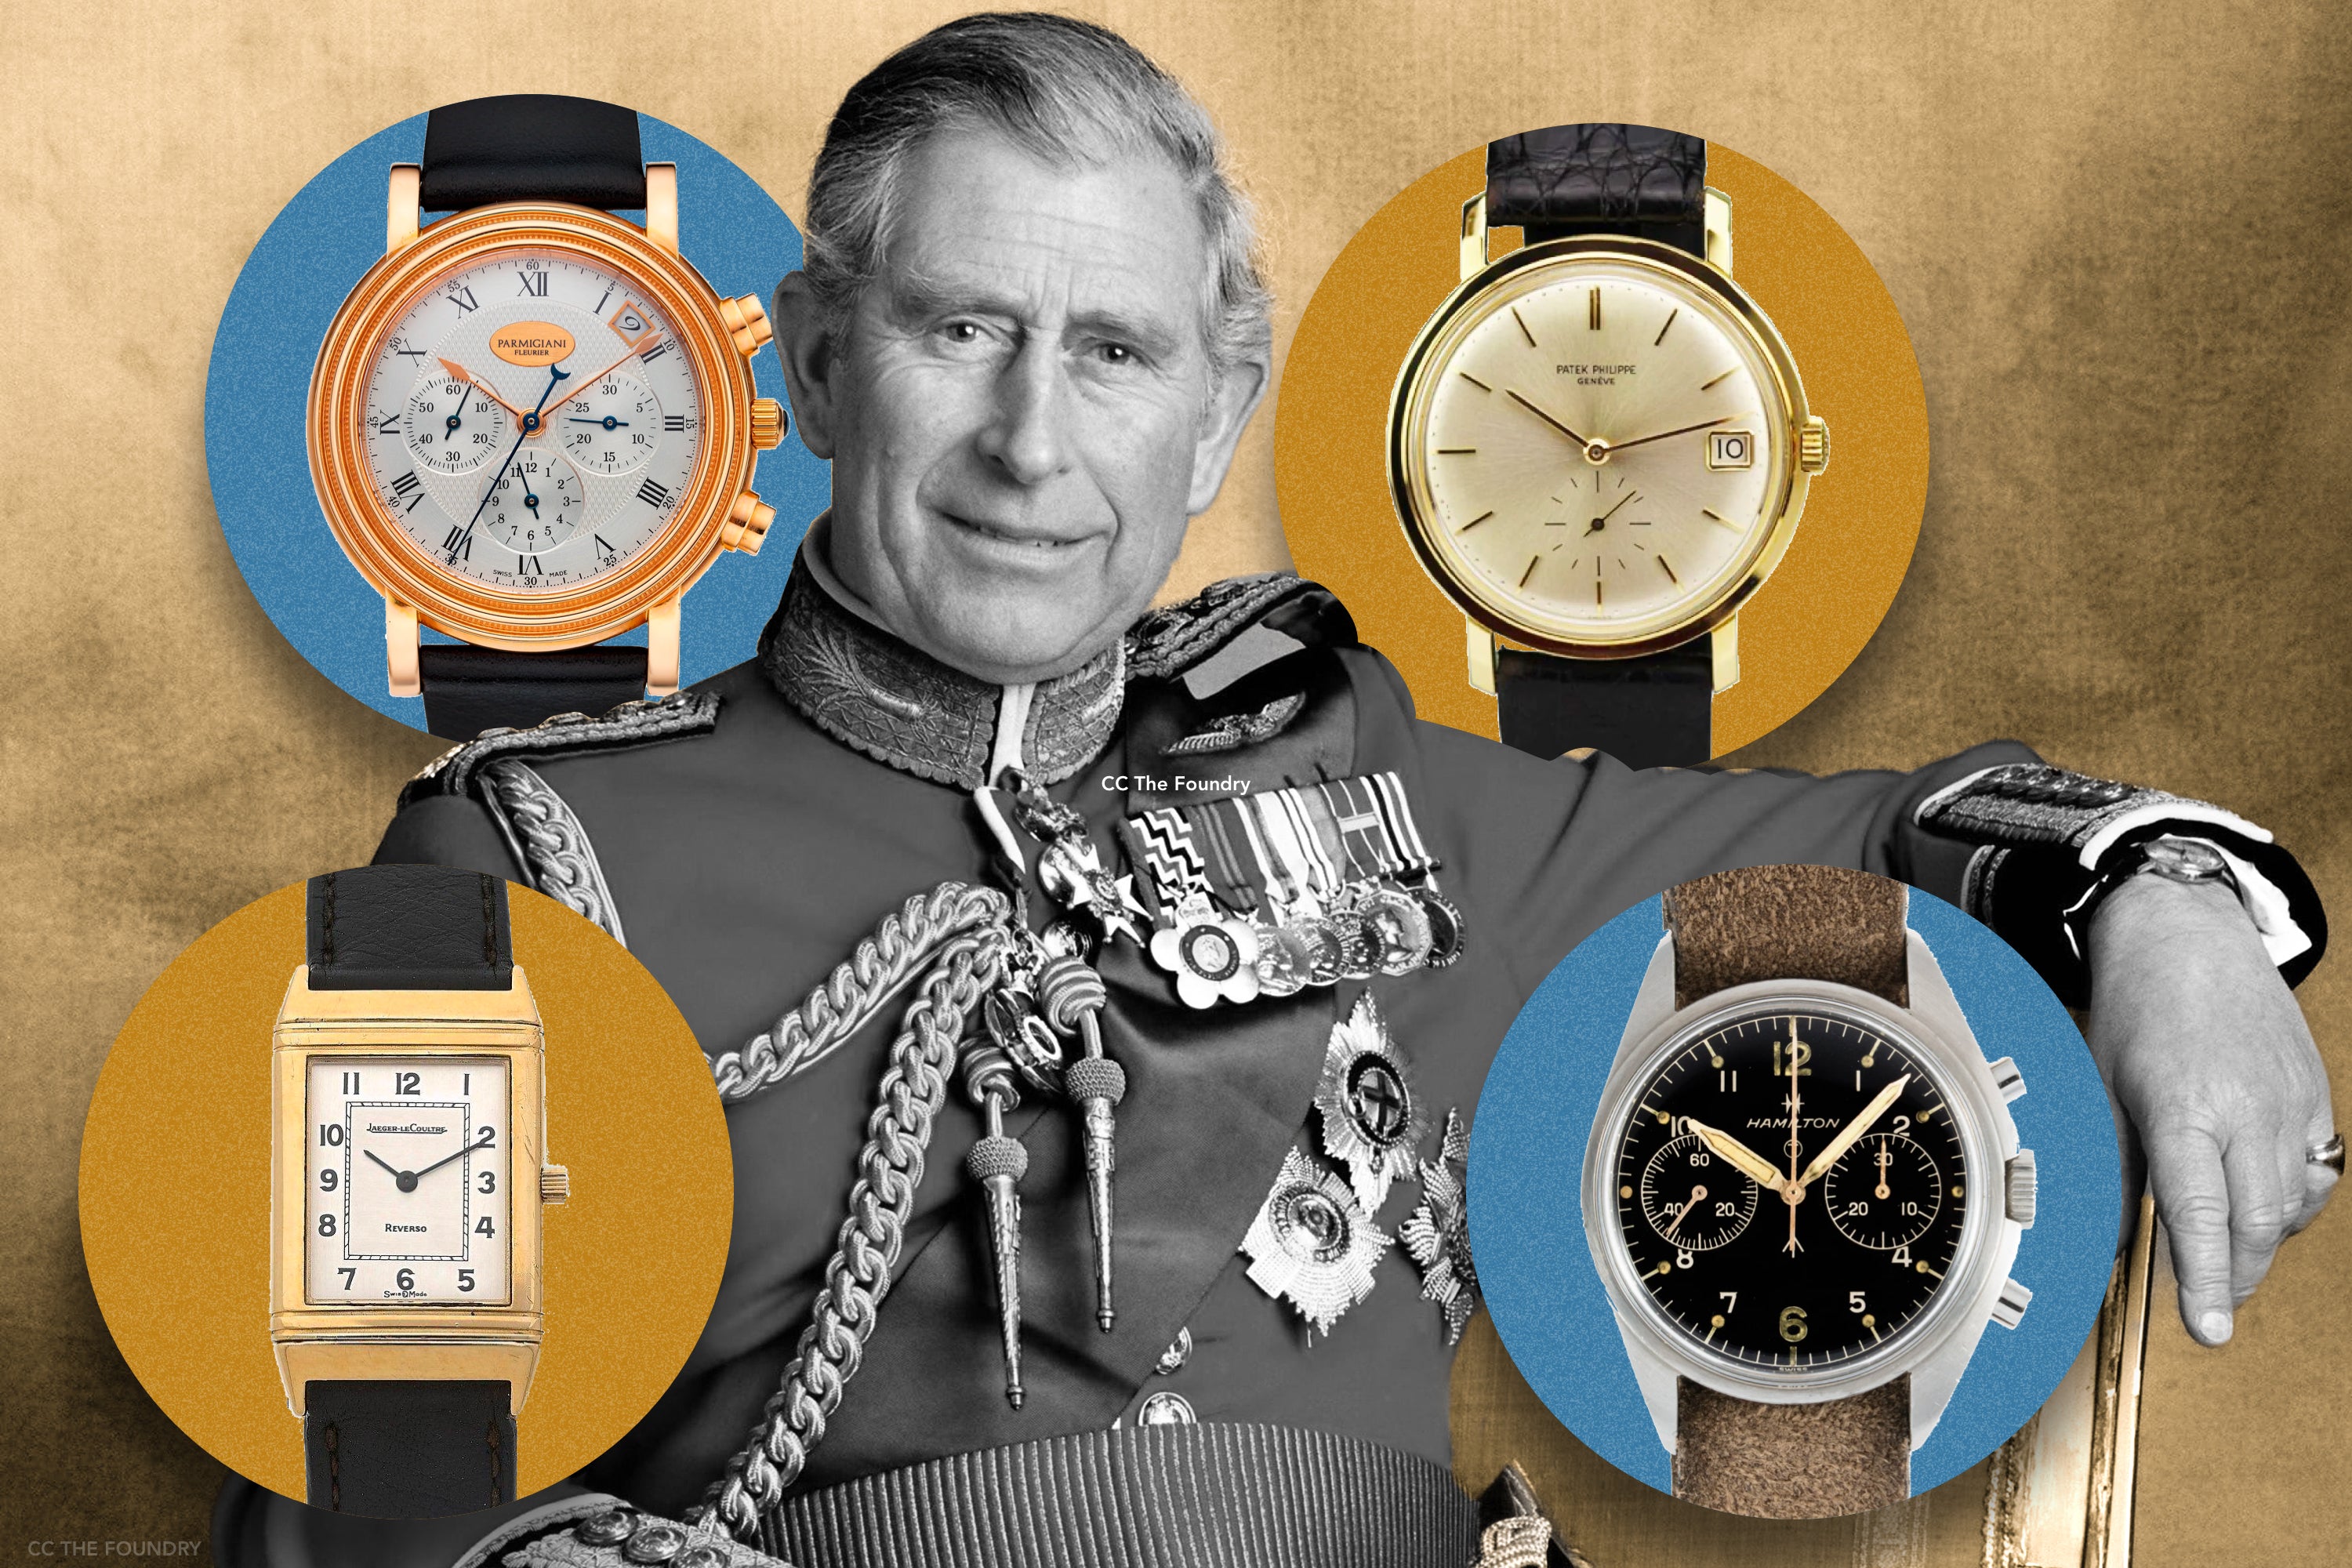 Luxury men's watches and their prices in Oman discover them now